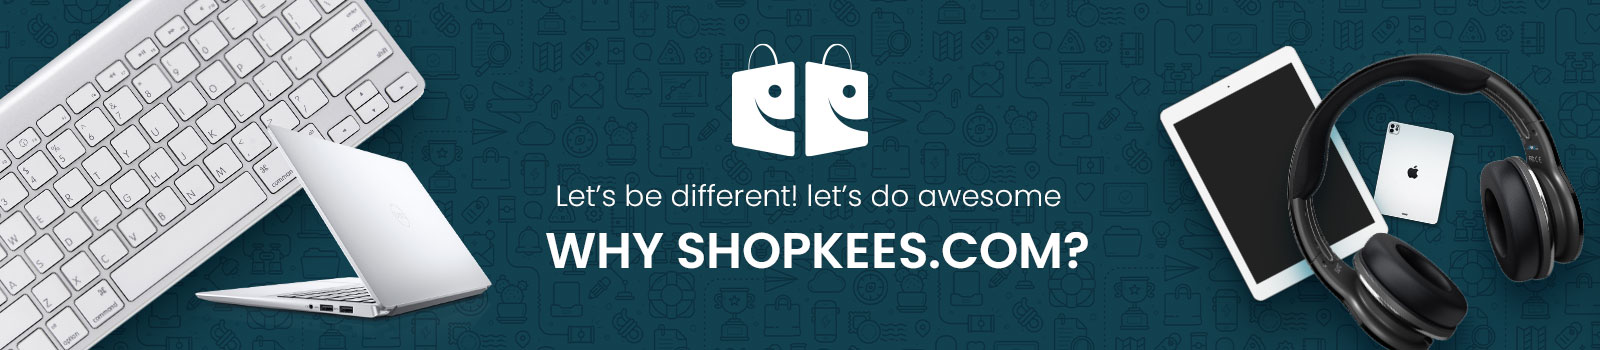 About Shopkees